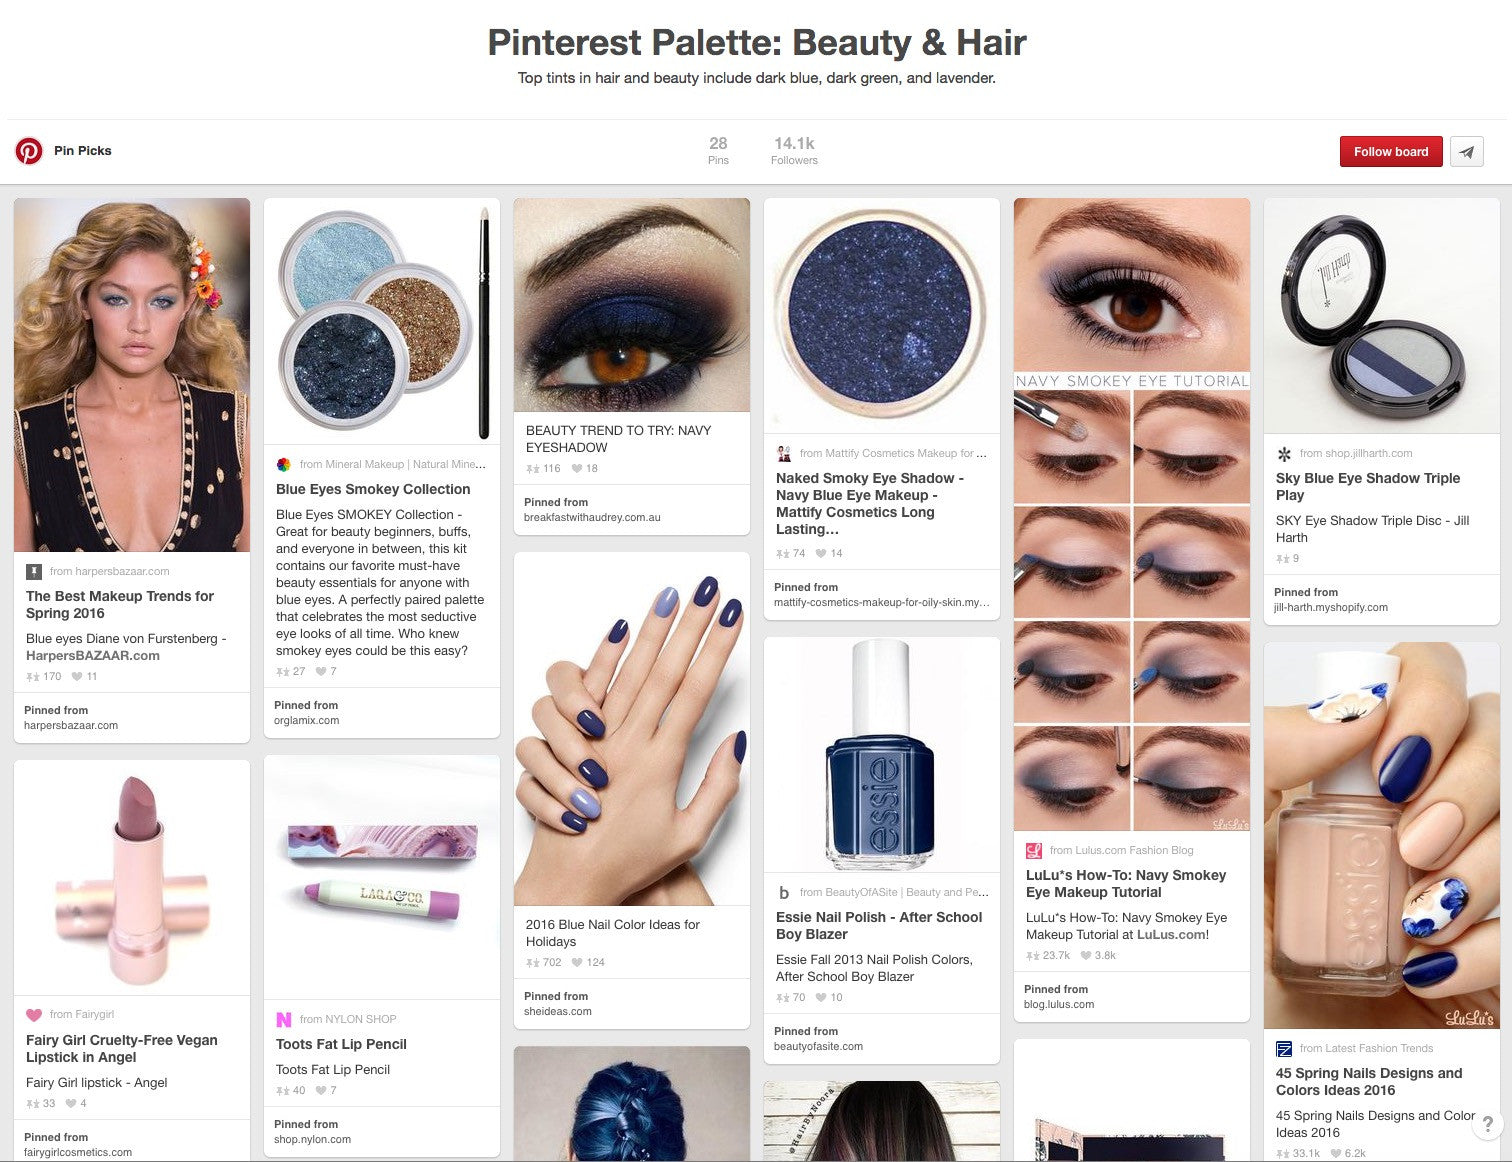 Beauty Trend report: What’s popular on Pinterest this month